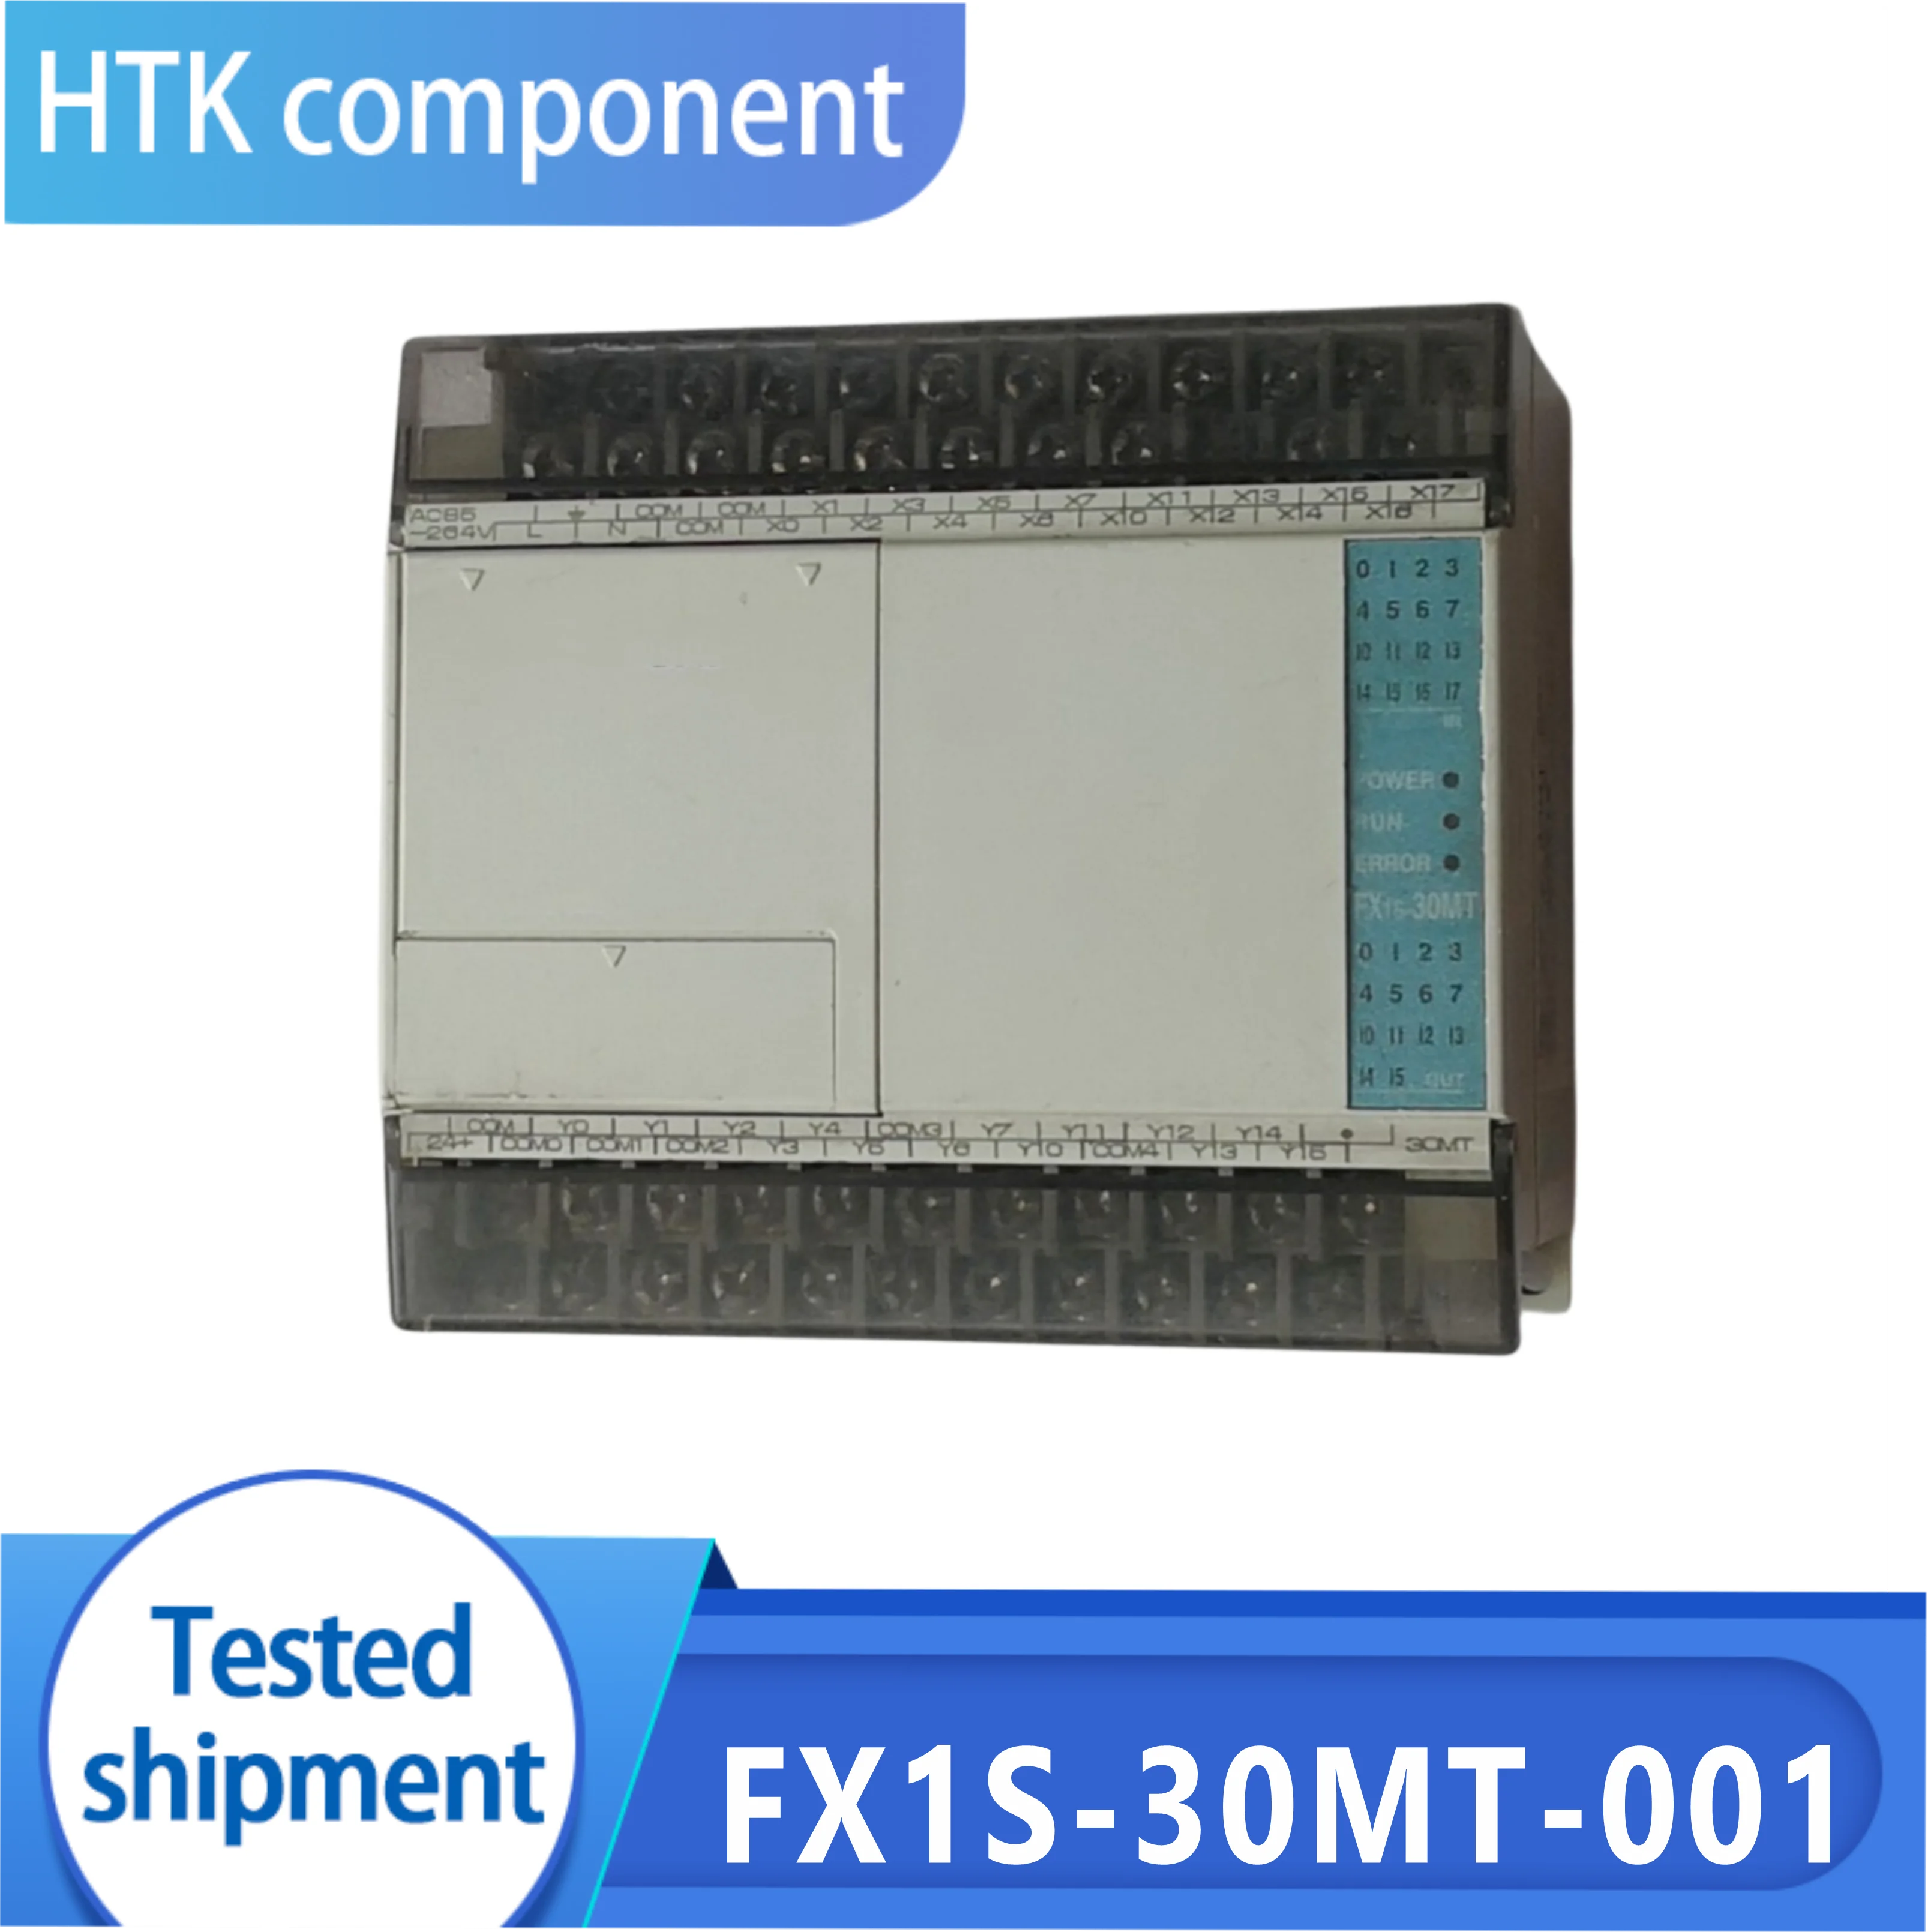 

New Original FX1S-30MT-001 Programmable Controllers